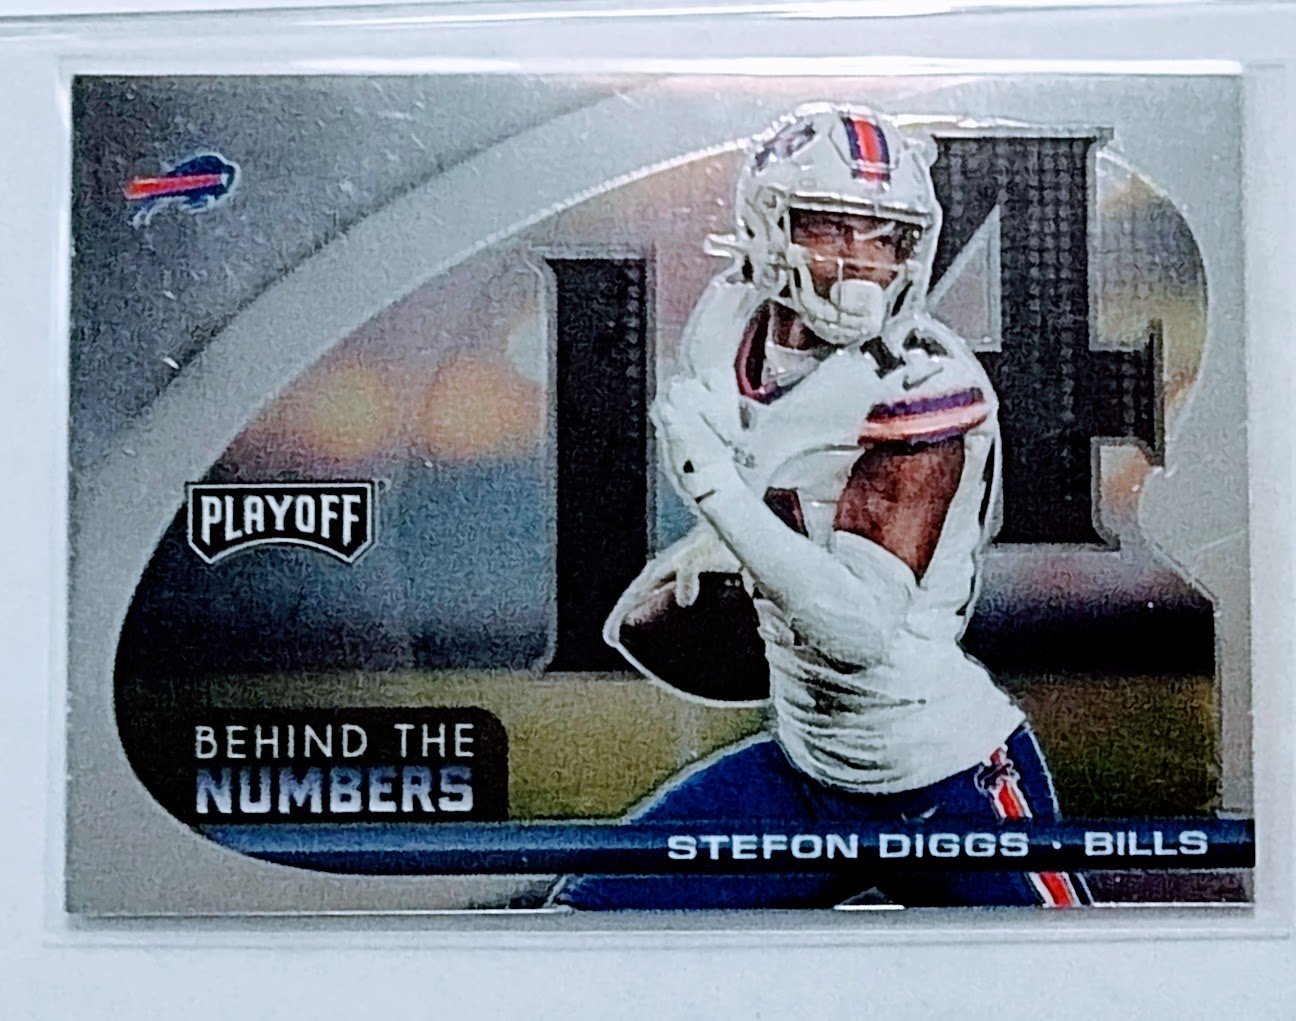 2021 Panini Playoff Stefon Diggs Behind the Numbers Insert Rookie Football Card AVM1 simple Xclusive Collectibles   